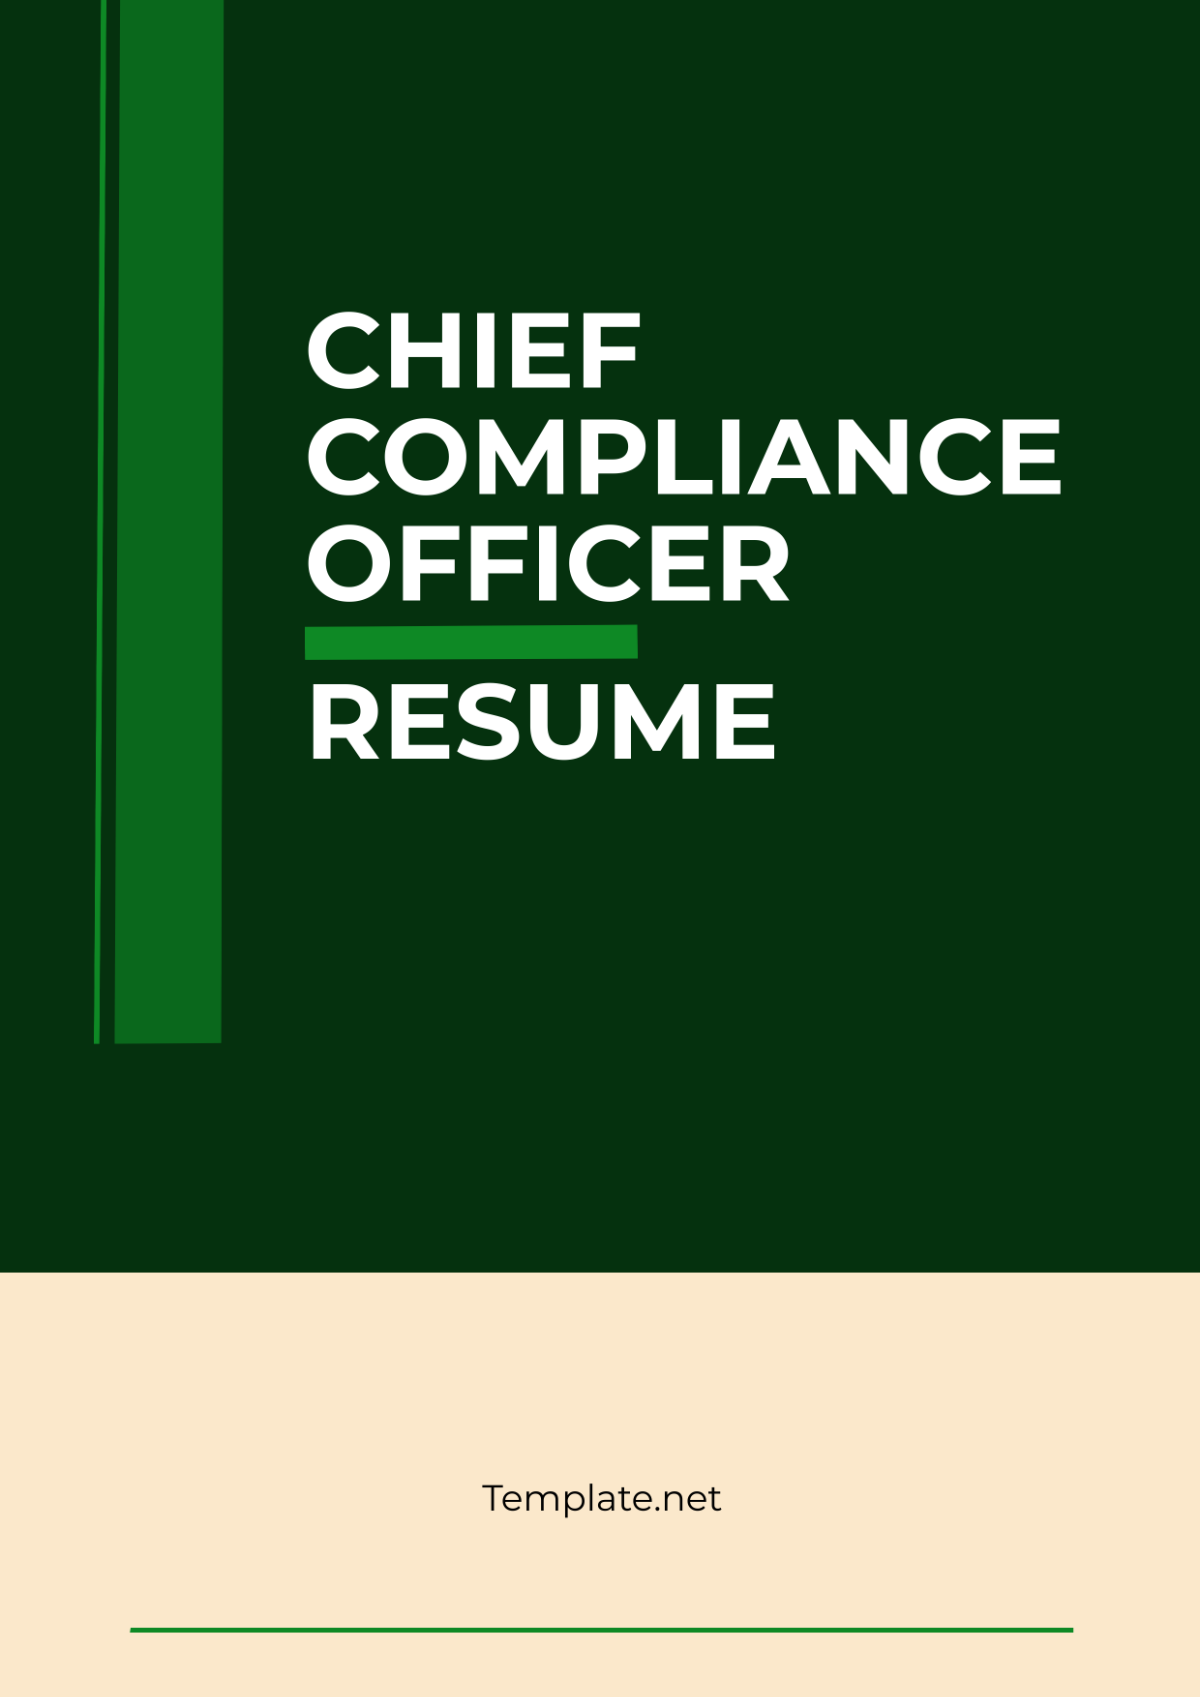 Chief Compliance Officer Resume Template